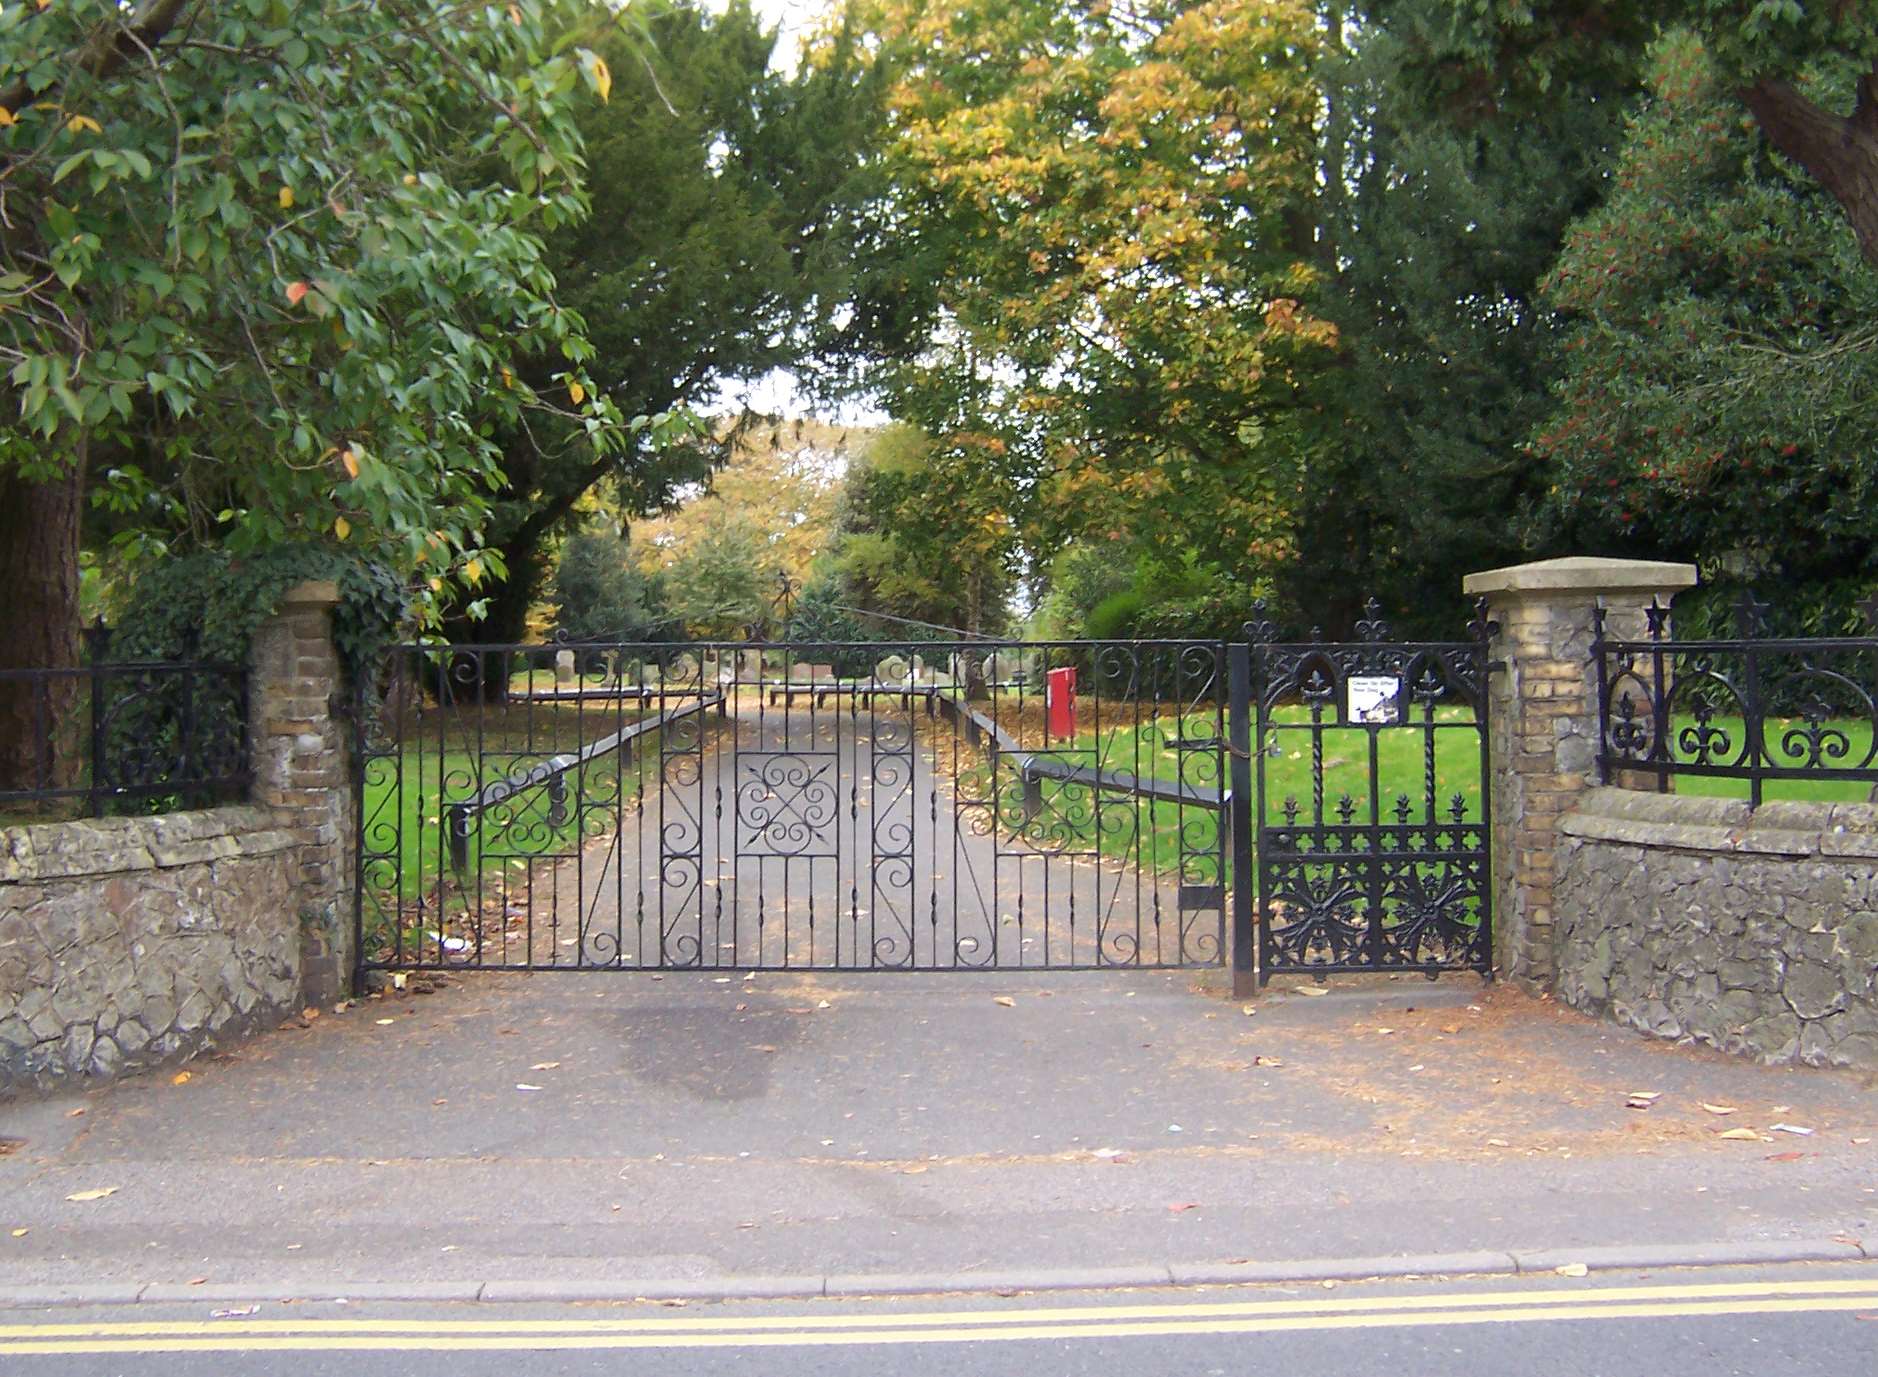 The council is urging parents not to block the cemetery's gates or park on site